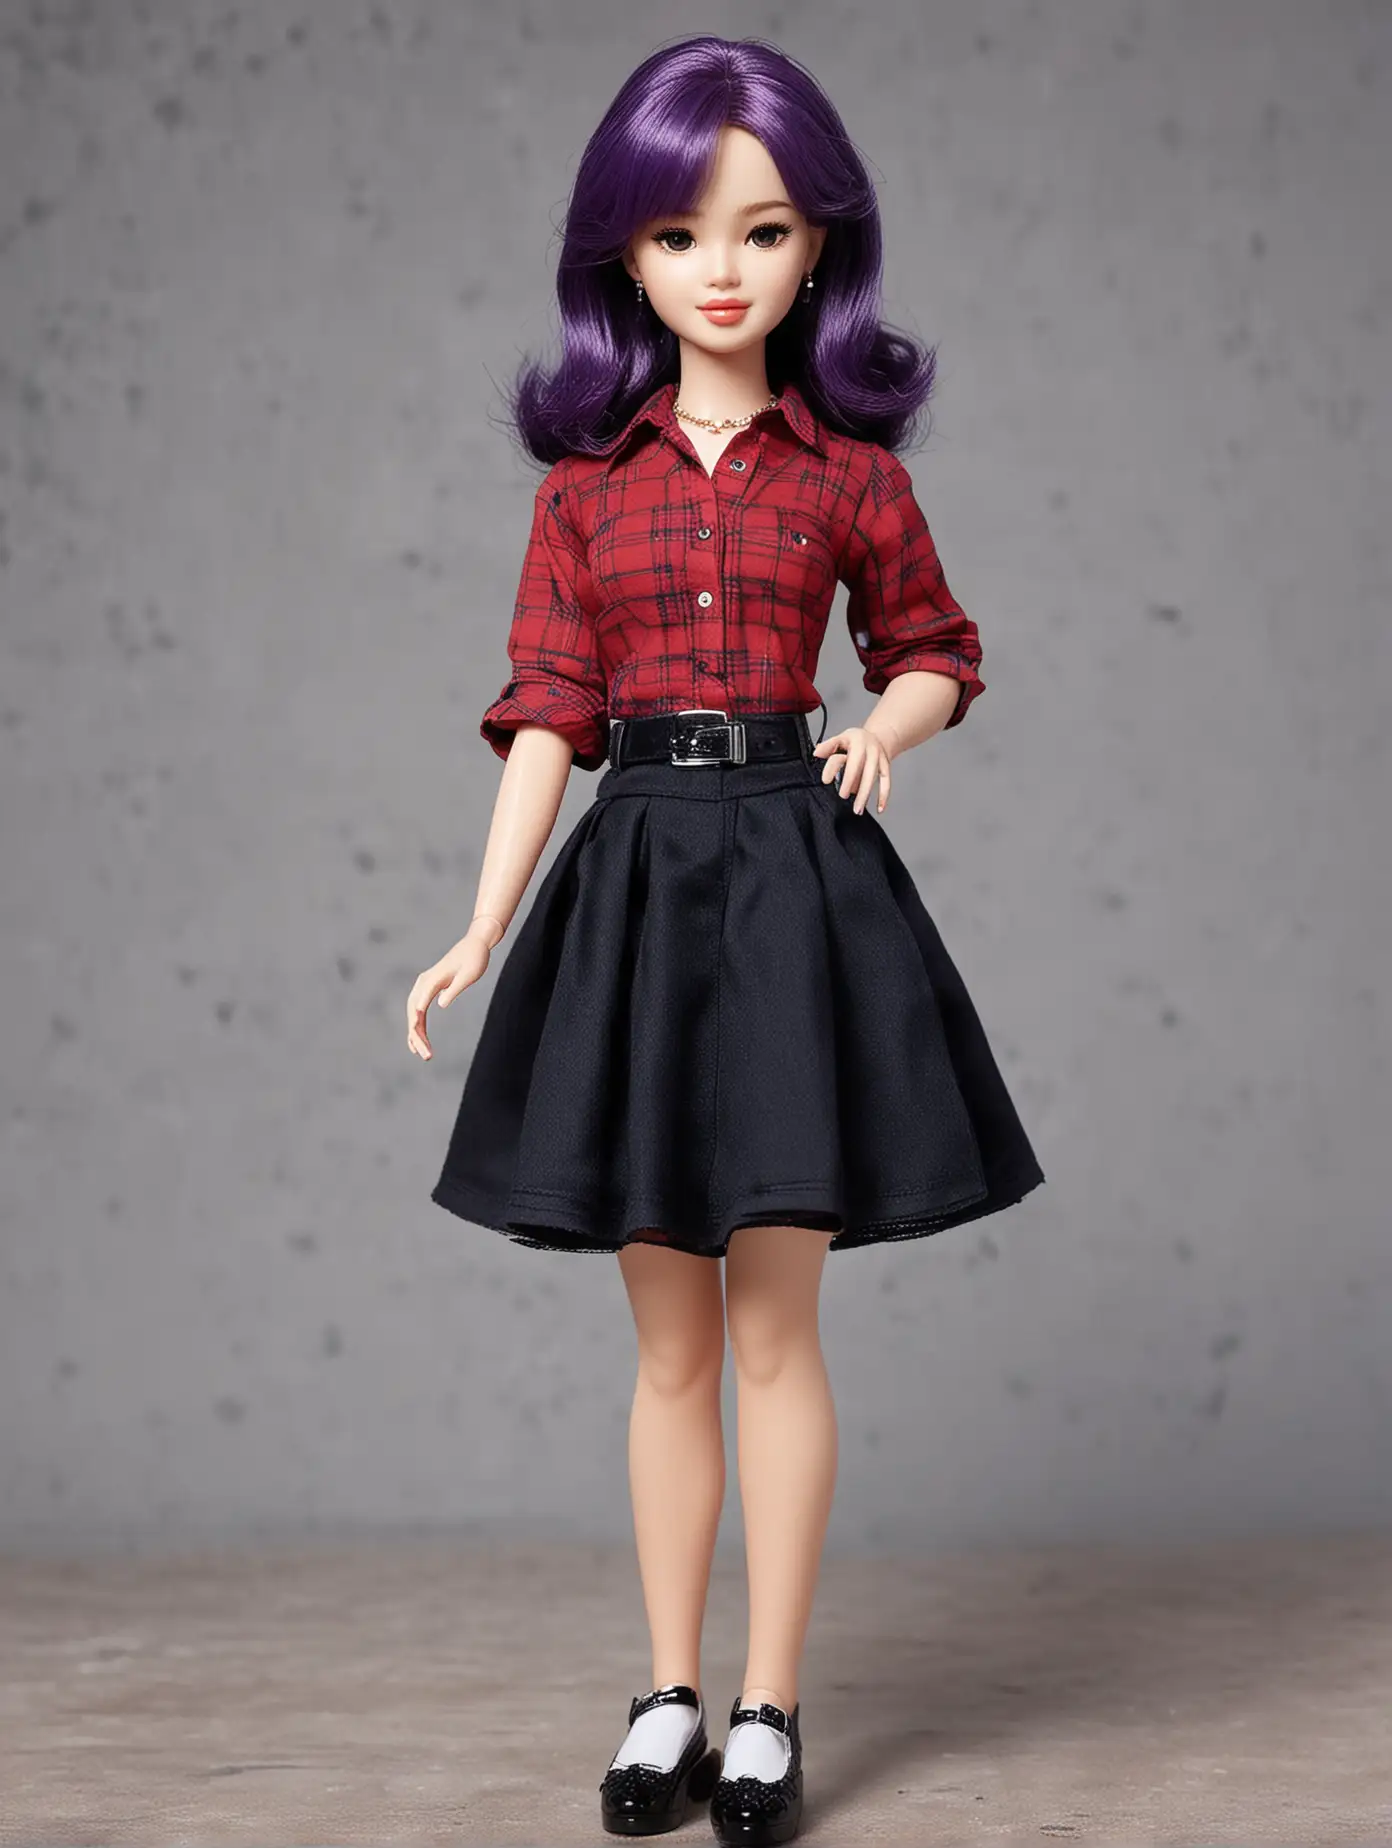 Song Hye-kyo is a very beautiful and chubby teenage Barbie doll. Height 5CM. Purple hair, wearing a red and black shirt waist dress. blue. white. sparkling. Cute Pose Style. black shoes. Fashion weekend